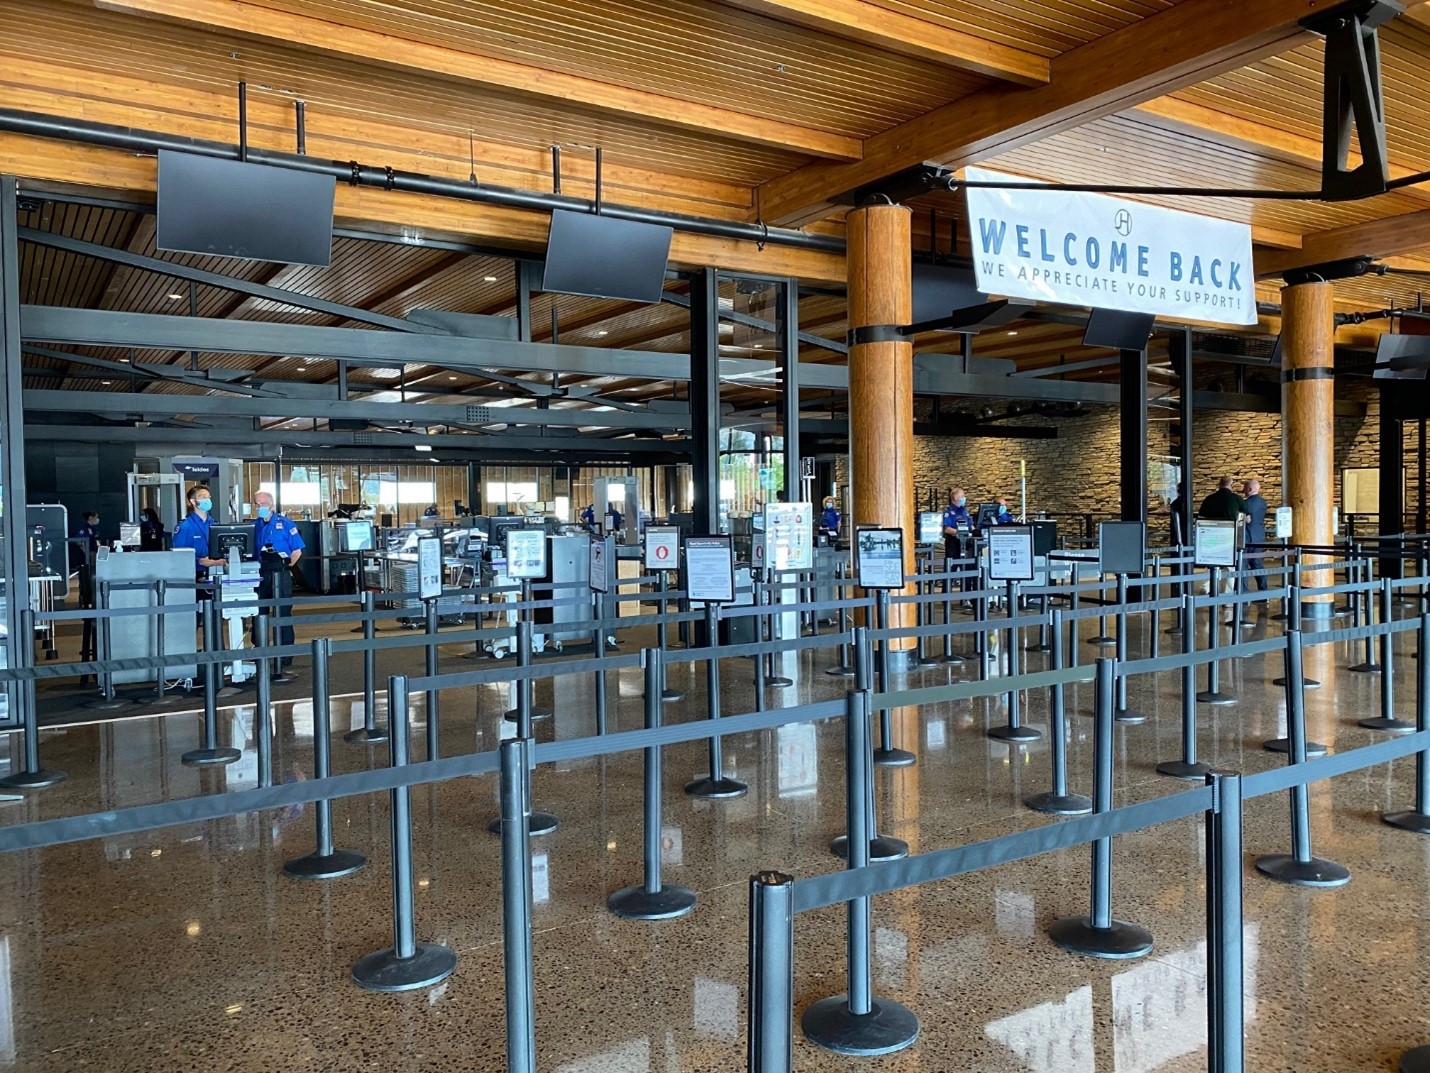 A series of stanchions under a wooden ceiling at Jackson Hole Airport.